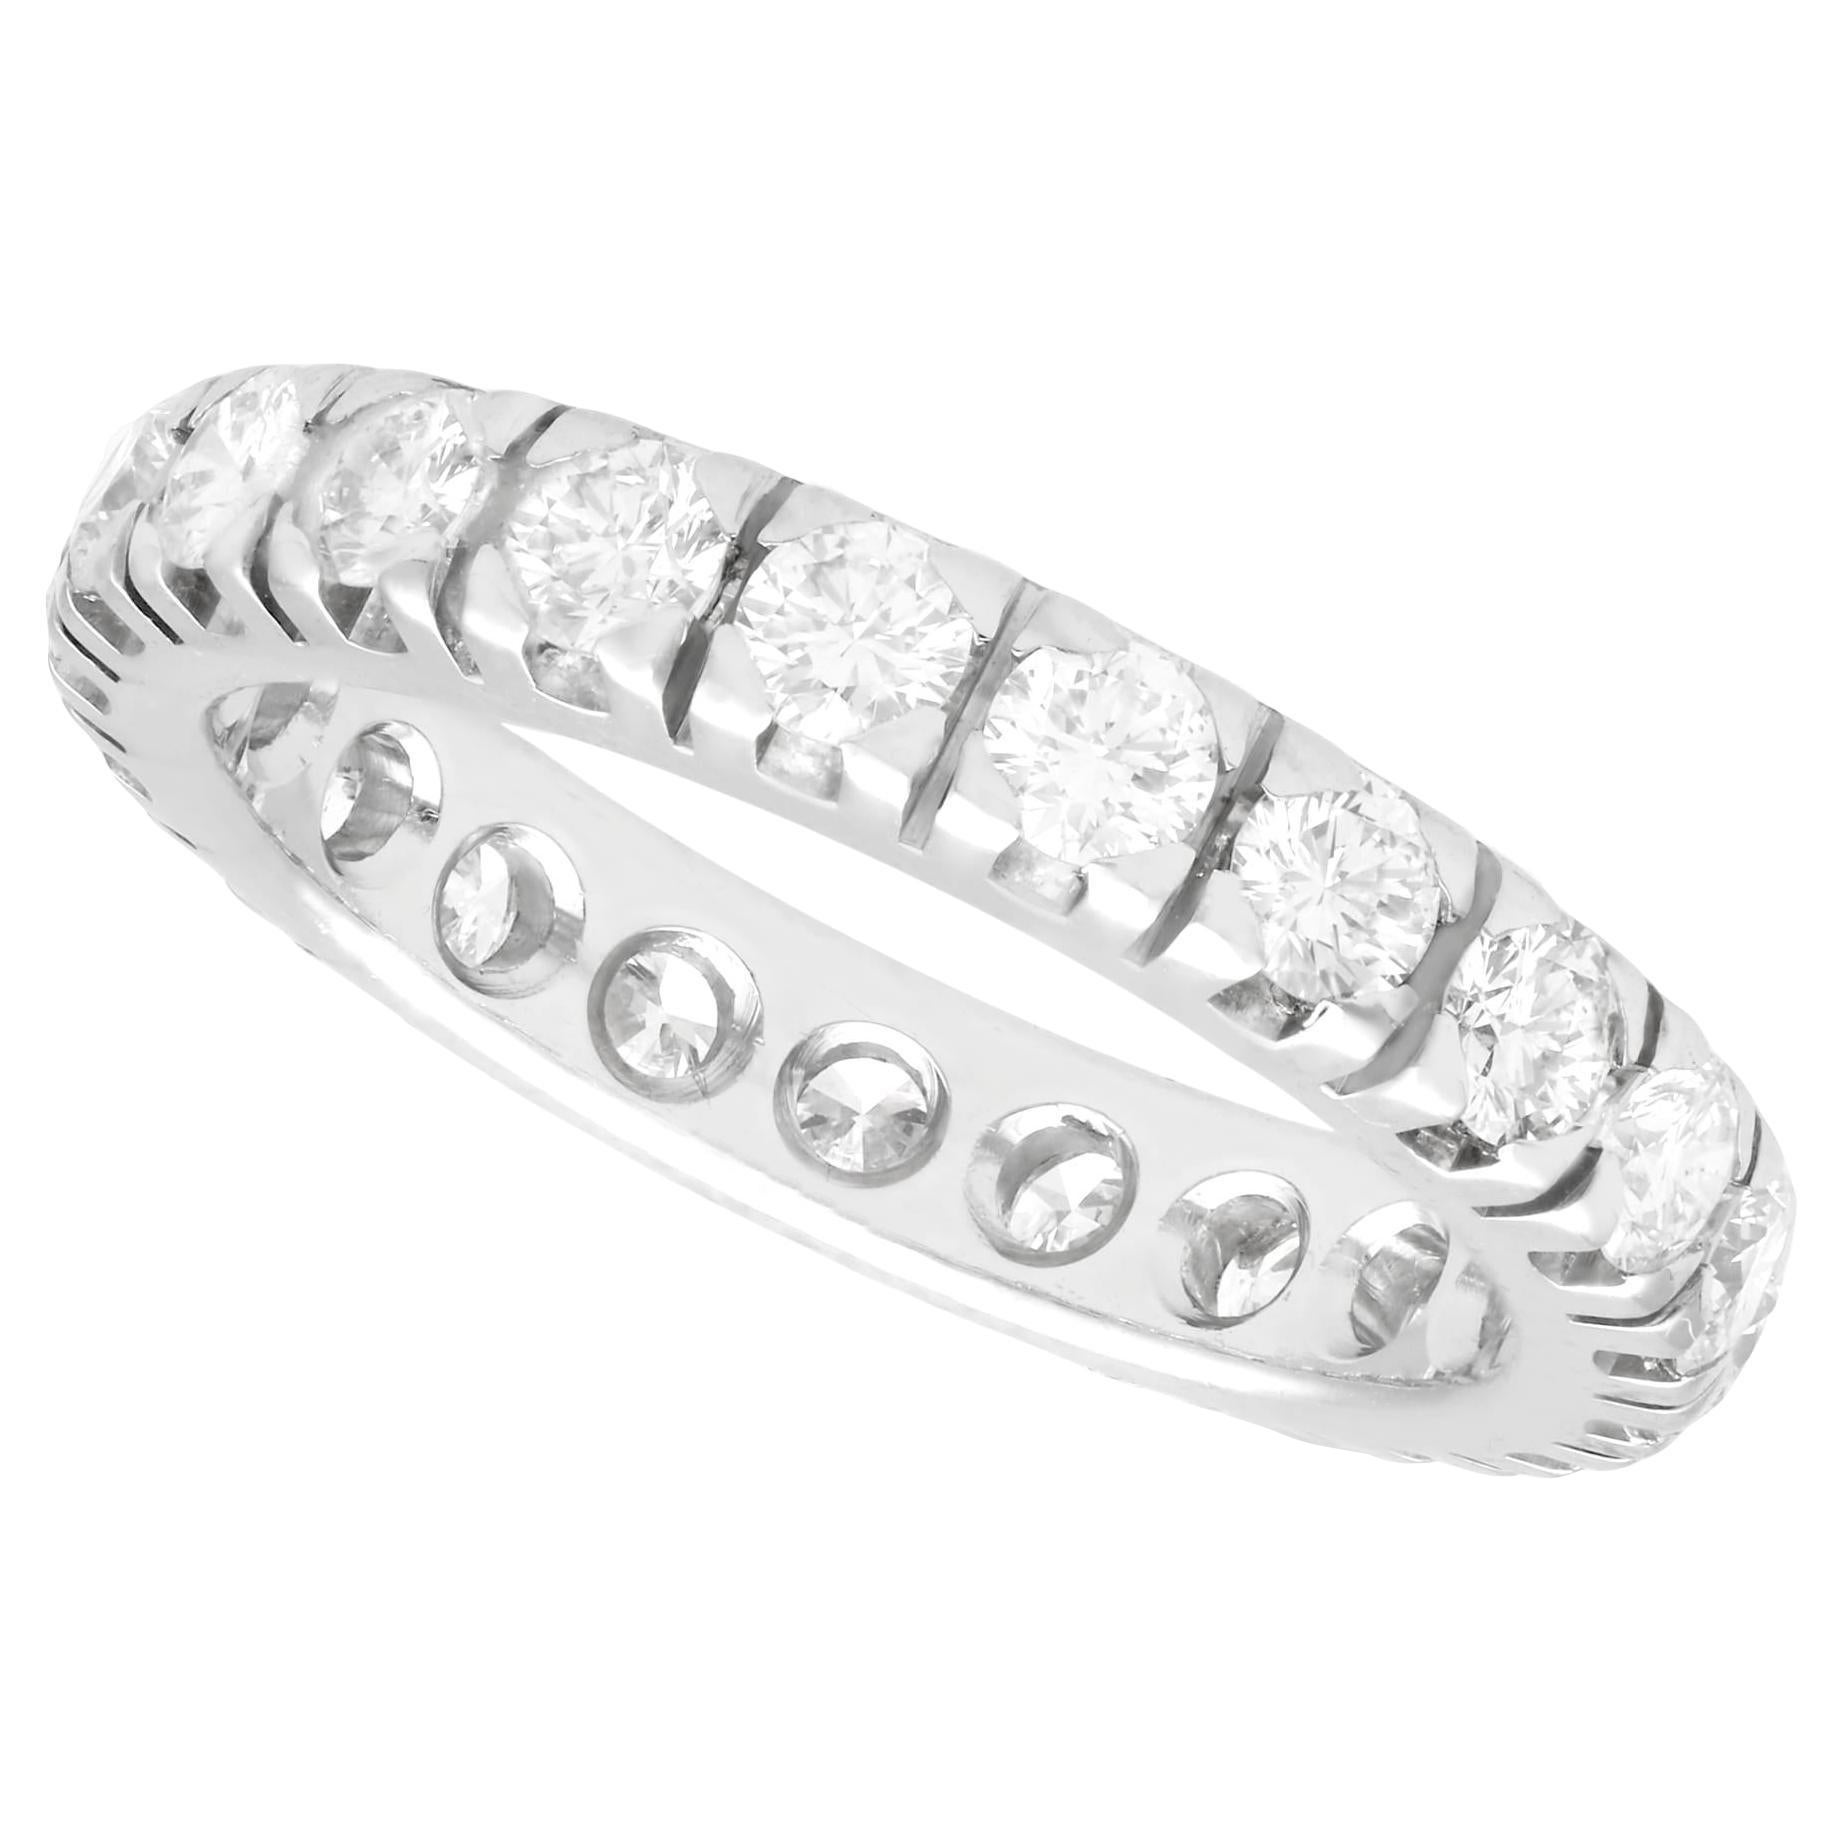 1980s Vintage 1.76 Carat Diamond and White Gold Full Eternity Ring For Sale